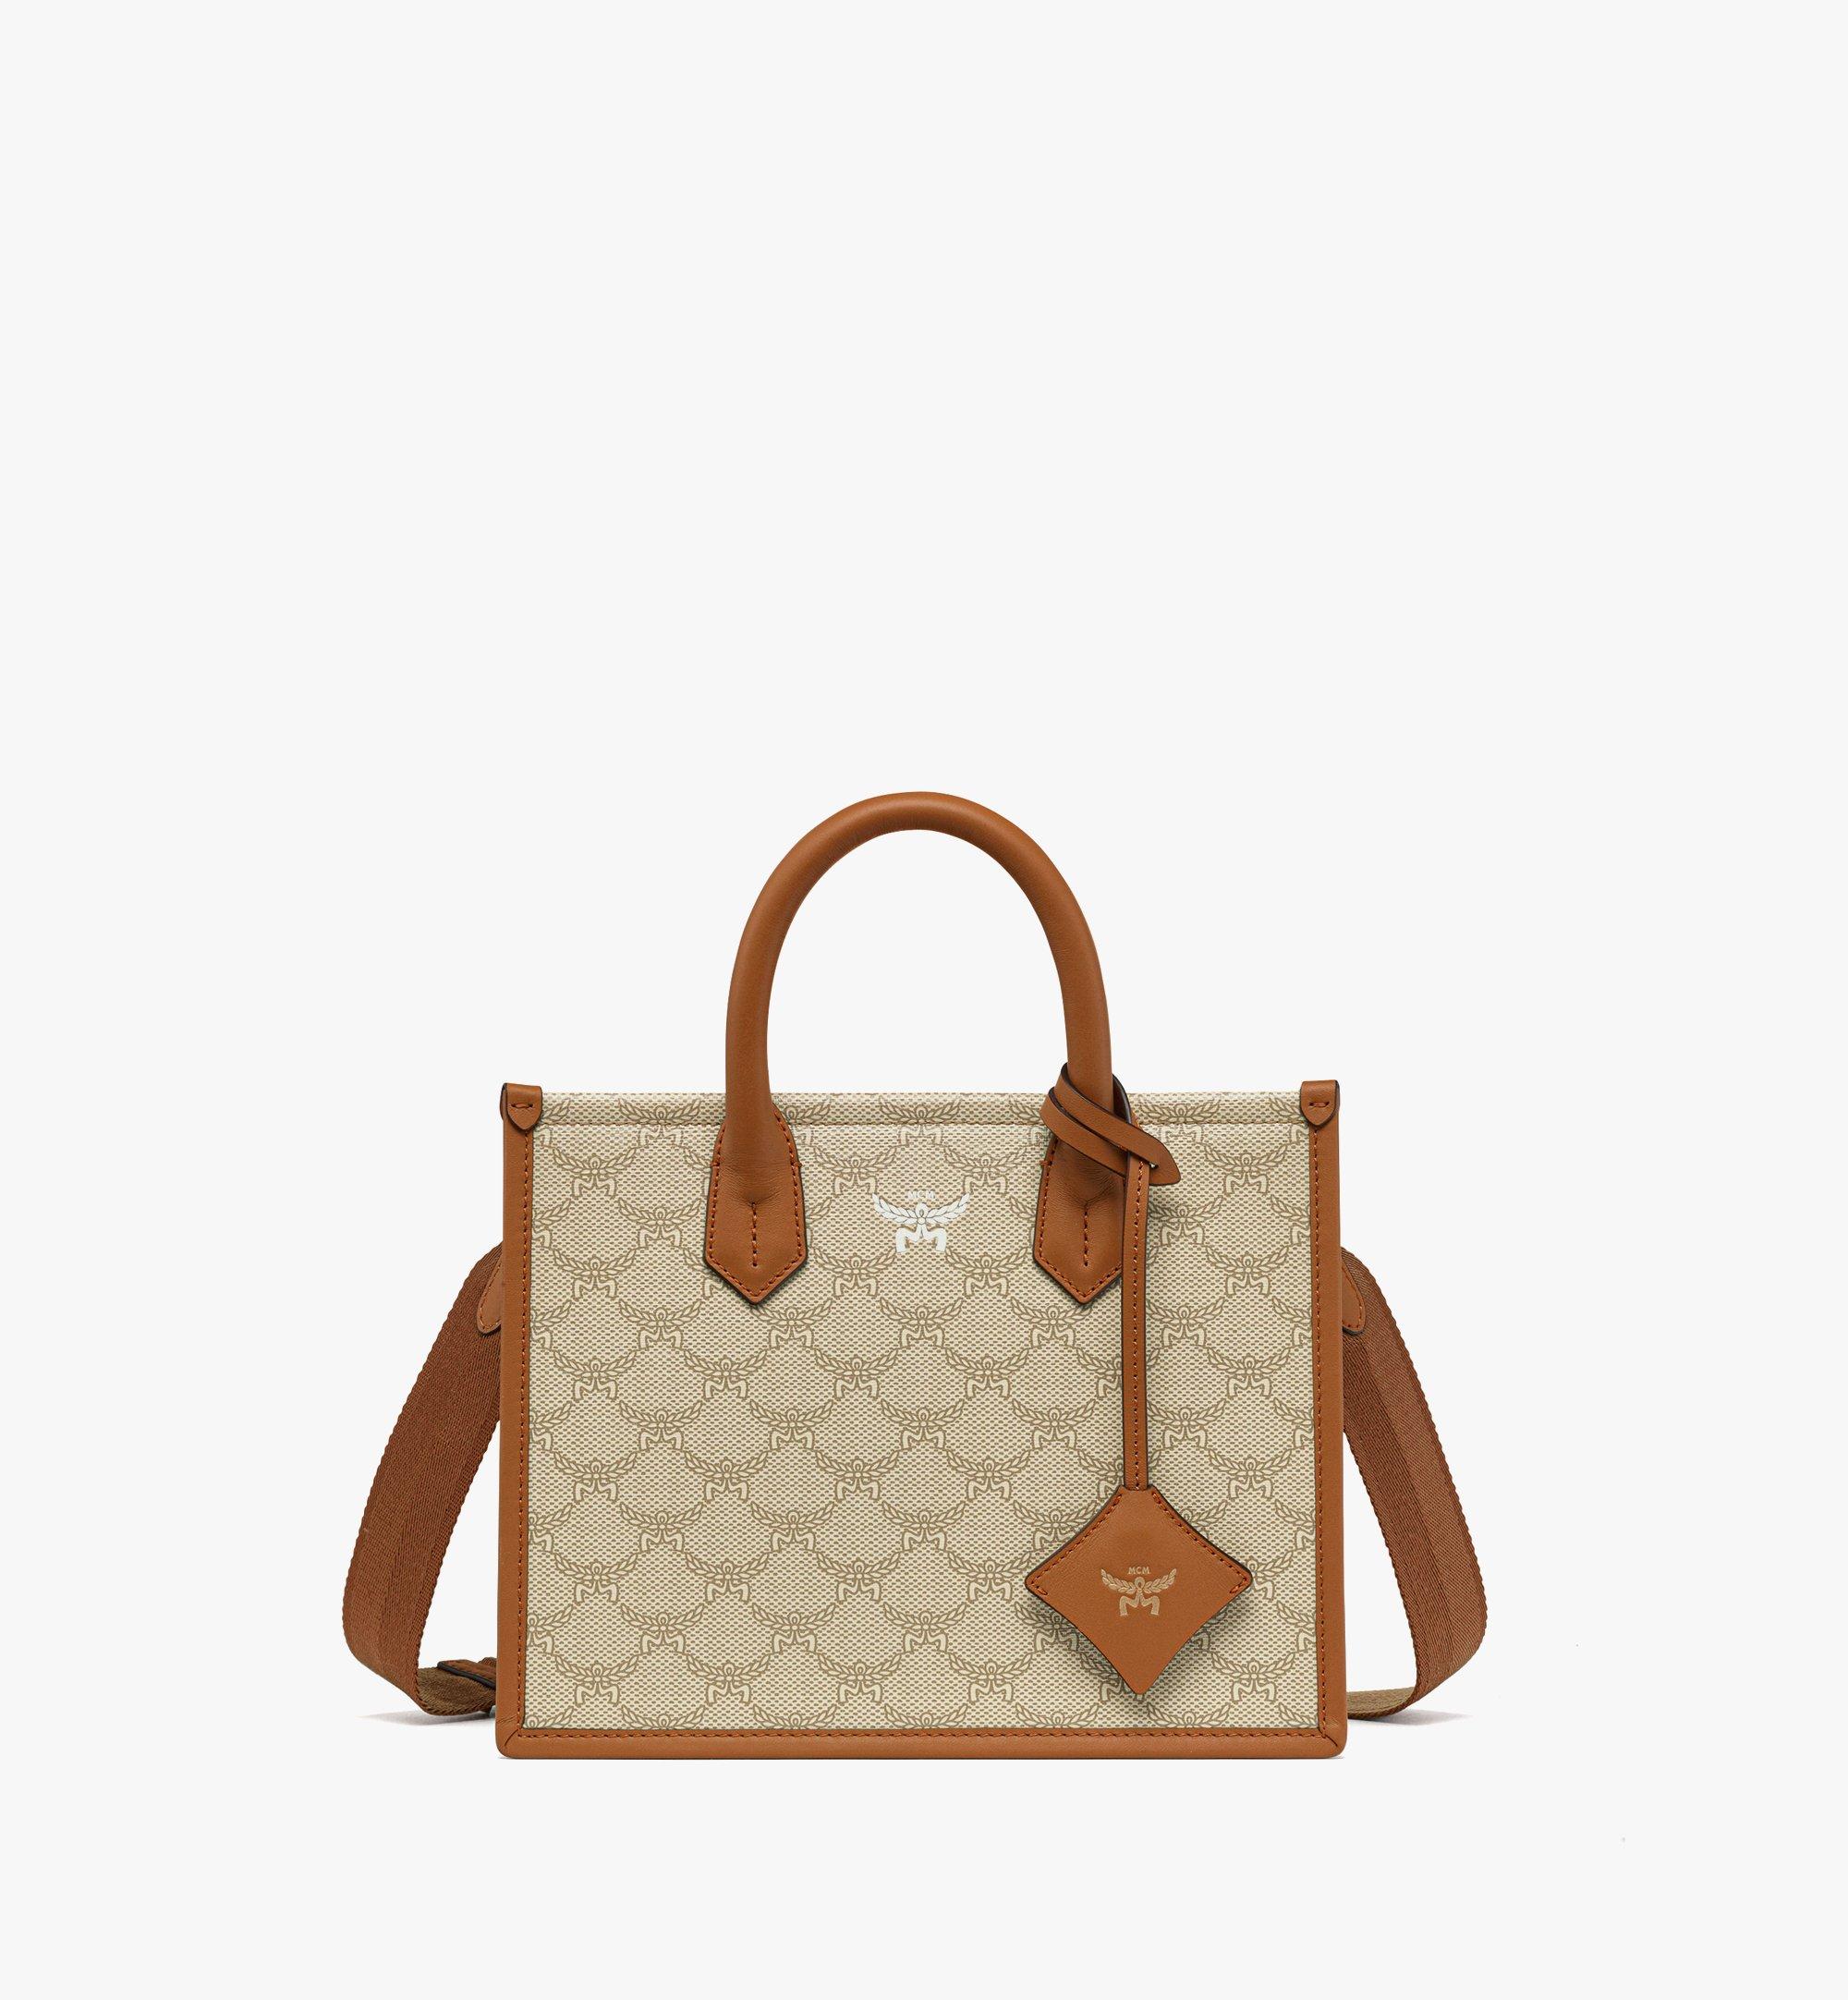 MCM Women's Tote Bags | Luxury Leather Shoppers & Totes | MCM® China